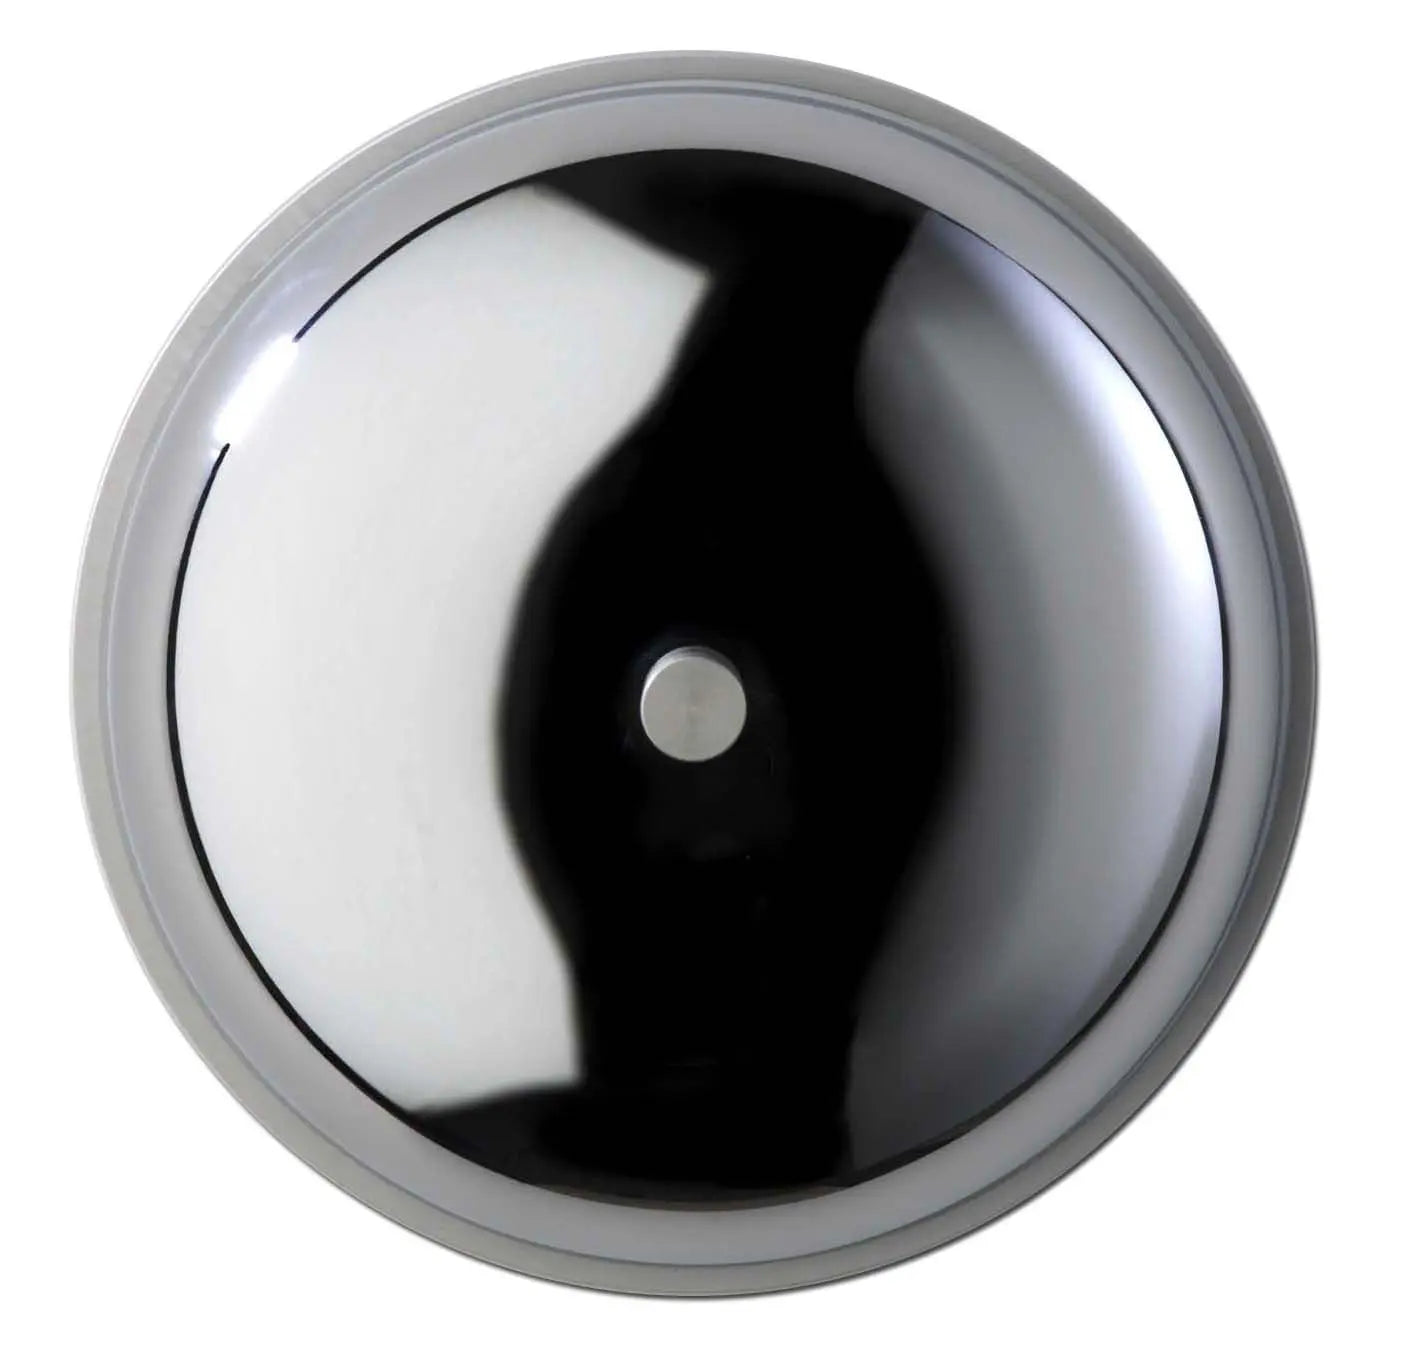 Spore Doorchime - 4.25" RING Real Bell Chime - Polished Chrome spOre